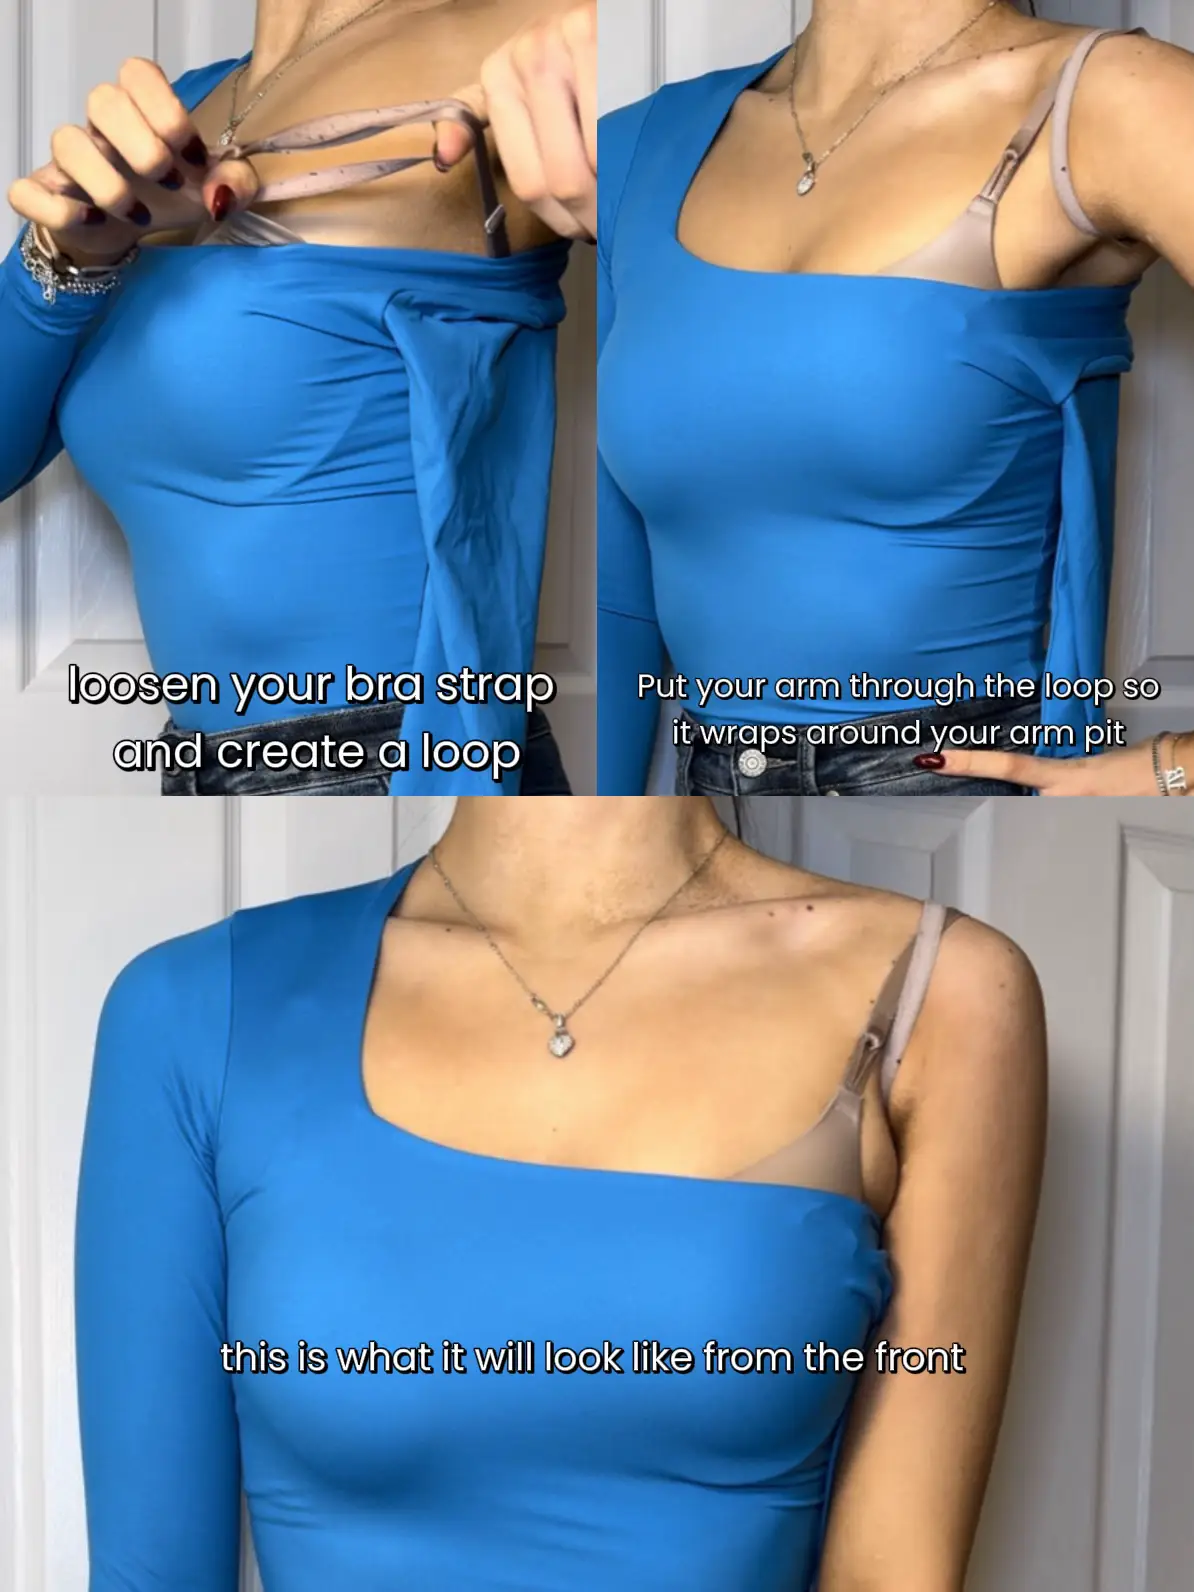 Styling Hack! When you need a strapless bra! Say you're in a pinch